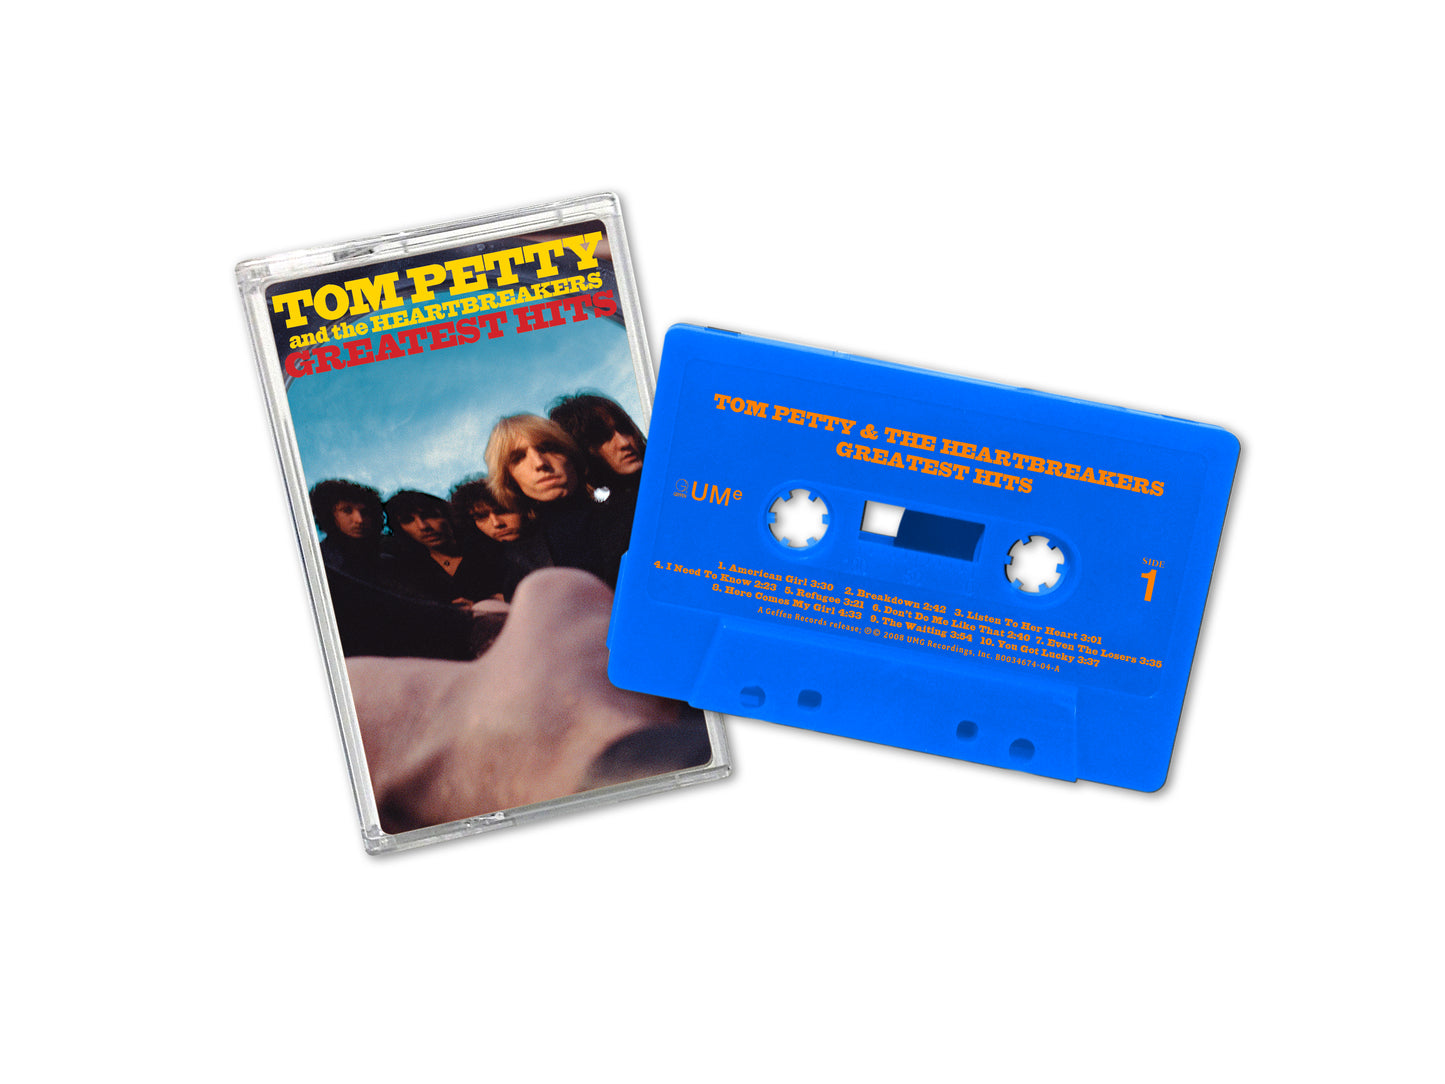 Tom Petty and the Heartbreakers’ Greatest Hits Cassette